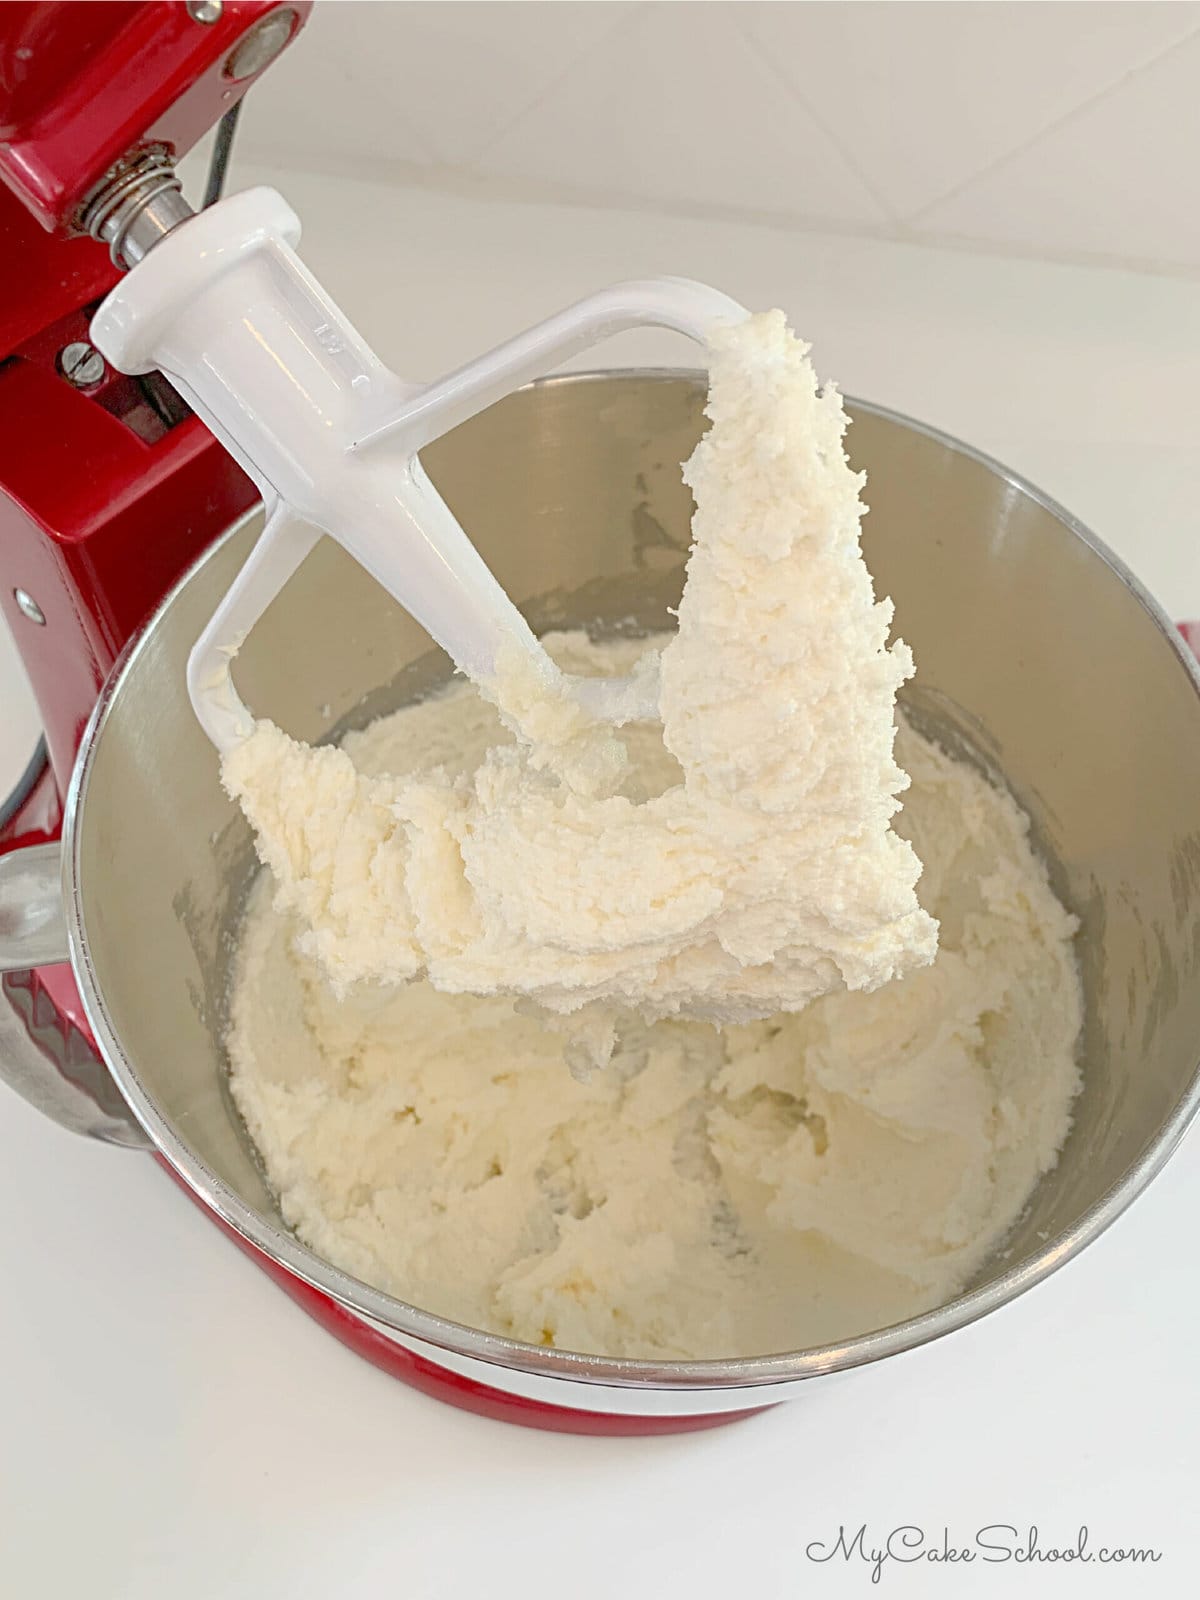 Butter and sugar mixture in mixing bowl with paddle attachment